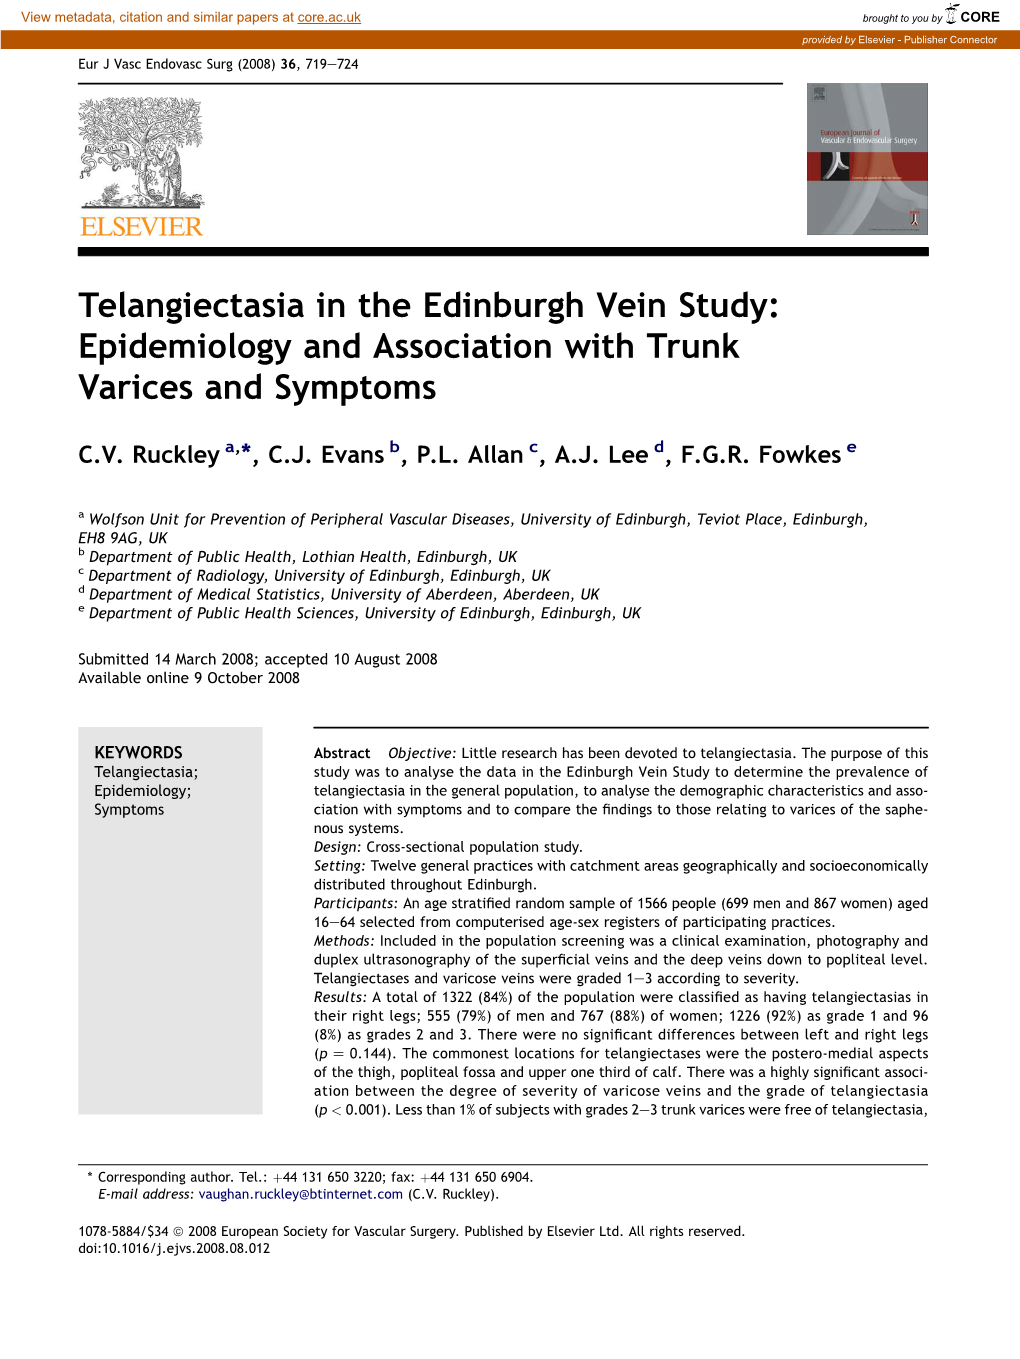 Telangiectasia in the Edinburgh Vein Study: Epidemiology and Association with Trunk Varices and Symptoms